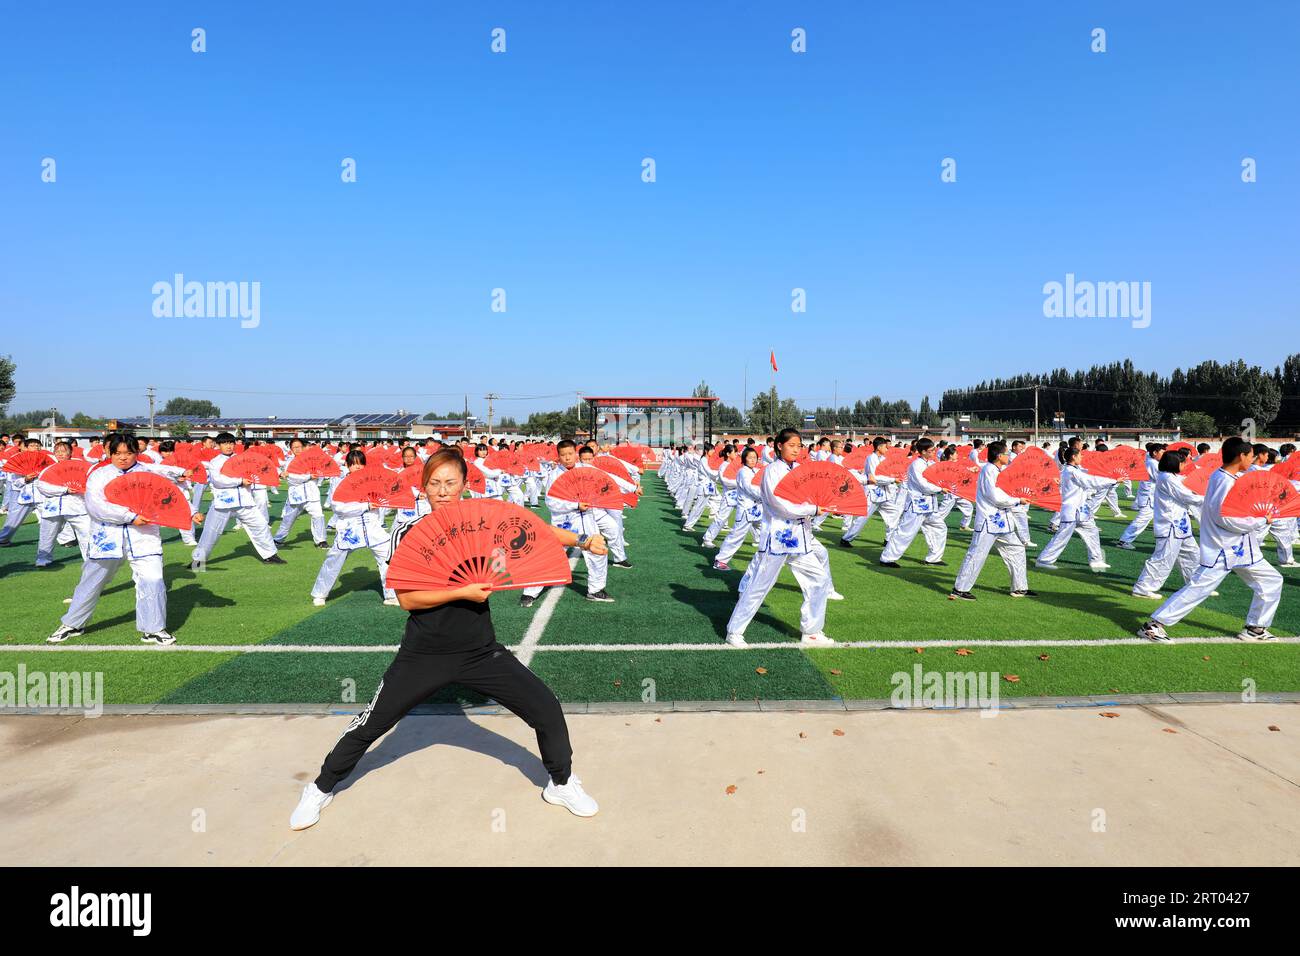 LUANNAN COUNTY, Hebei Province, China - September 30, 2020: Middle school students practice Taiji Fan on the playground Stock Photo